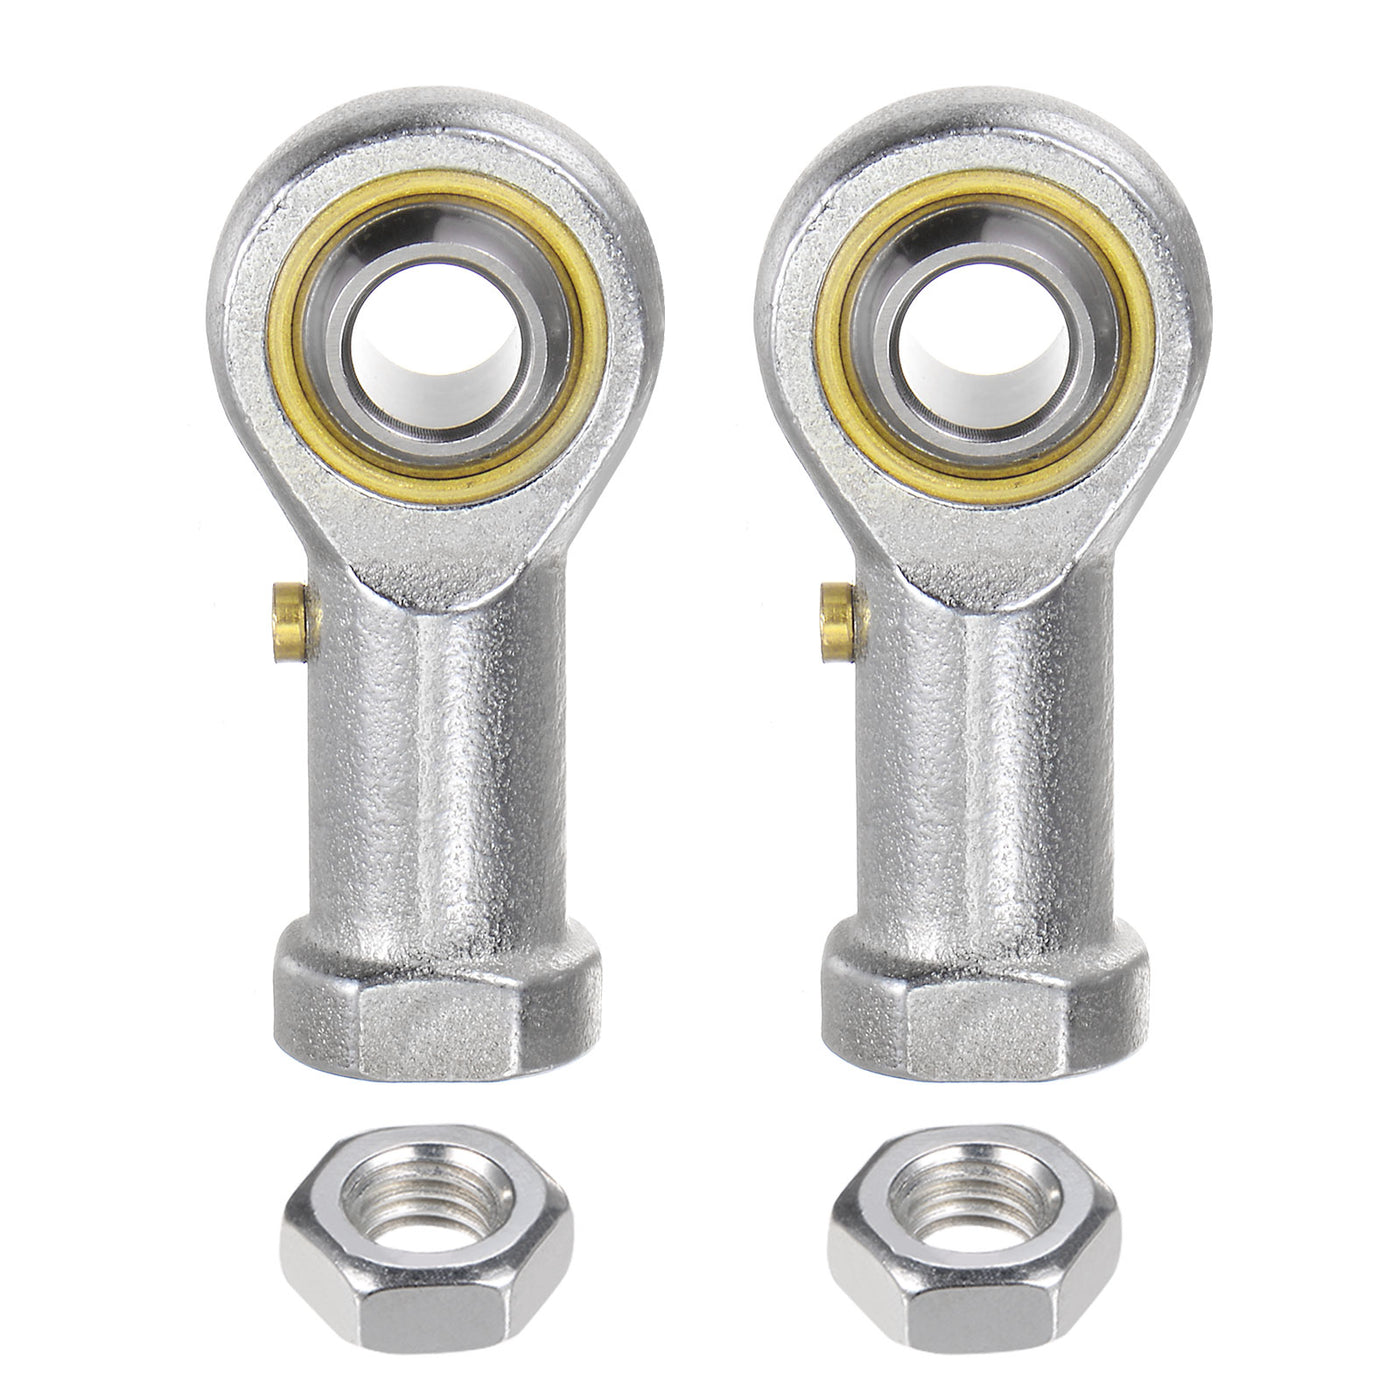 uxcell Uxcell 2pcs PHS8 M8 Female Rod End Bearing M8x1.25 Right Hand Thread,Includes Jam Nut